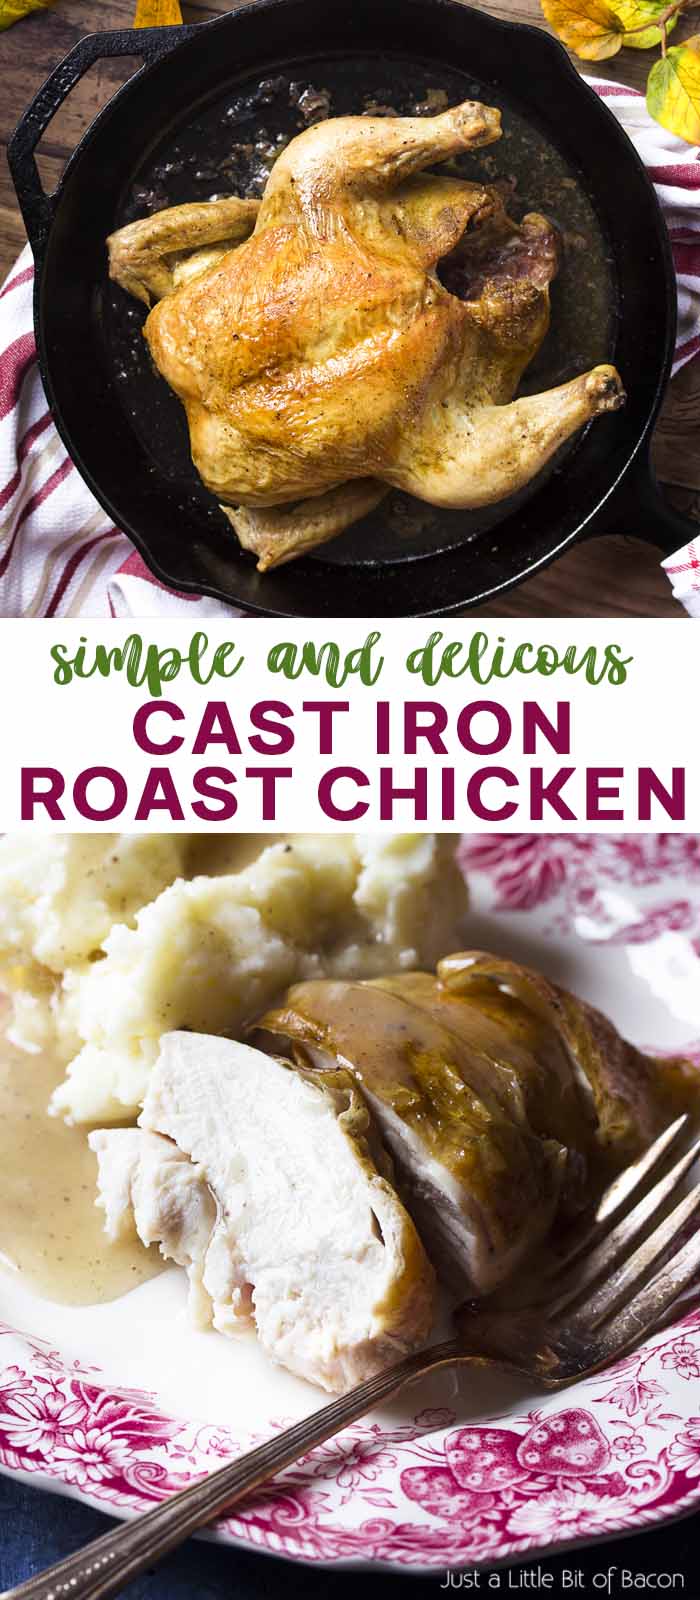 Two views of roast chicken with text overlay - Cast Iron Roast Chicken.